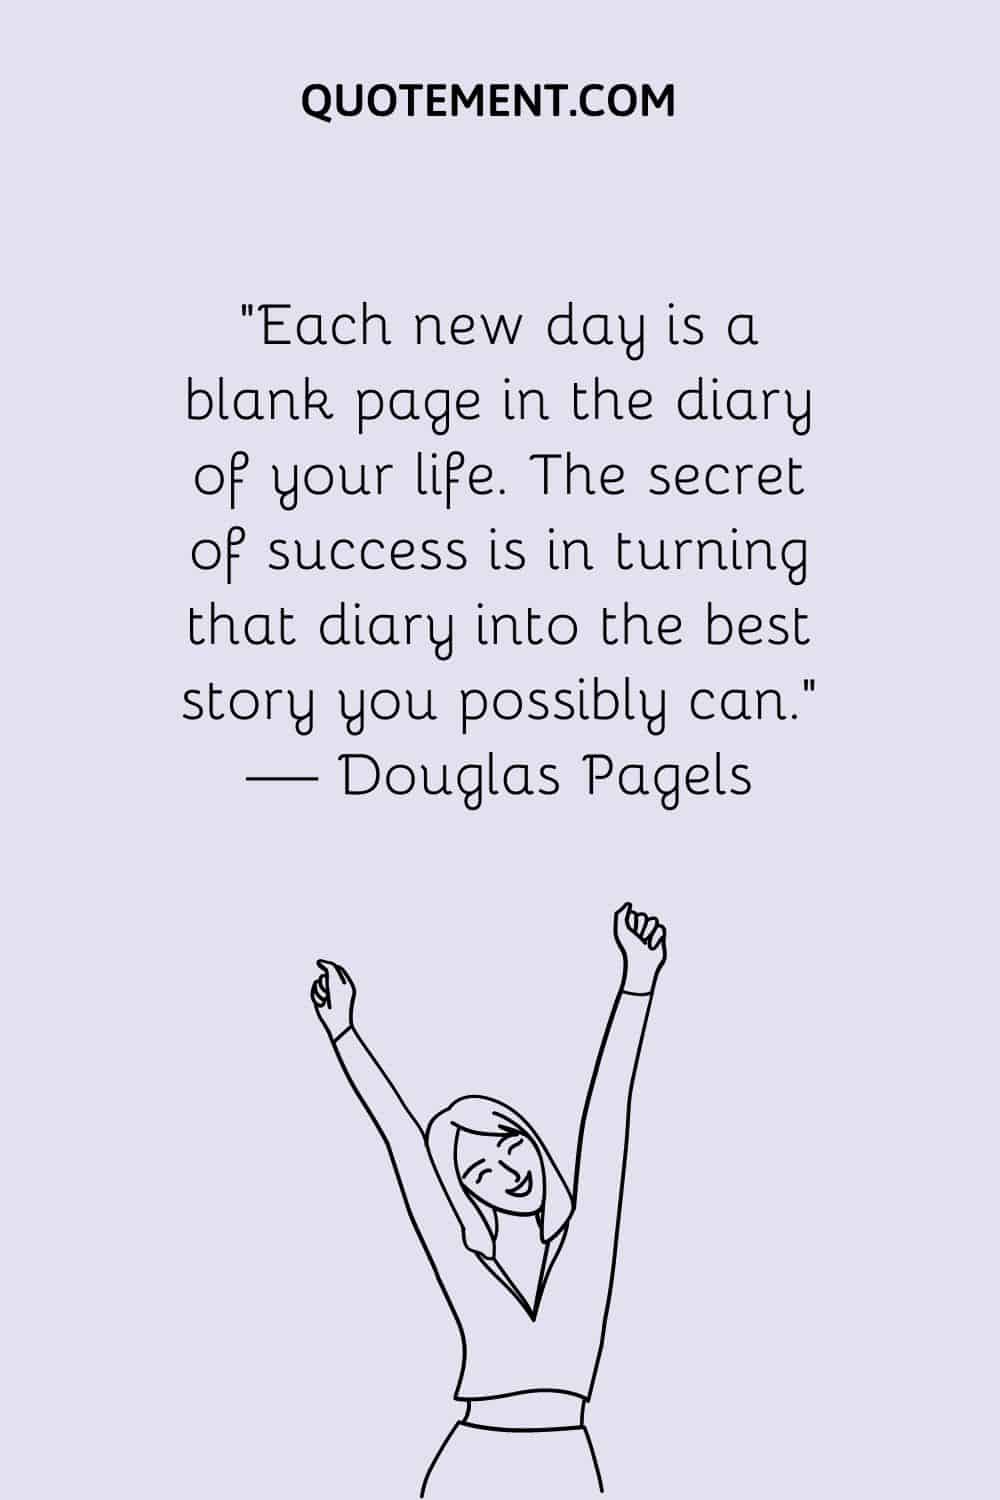 Each new day is a blank page in the diary of your life. The secret of success is in turning that diary into the best story you possibly can